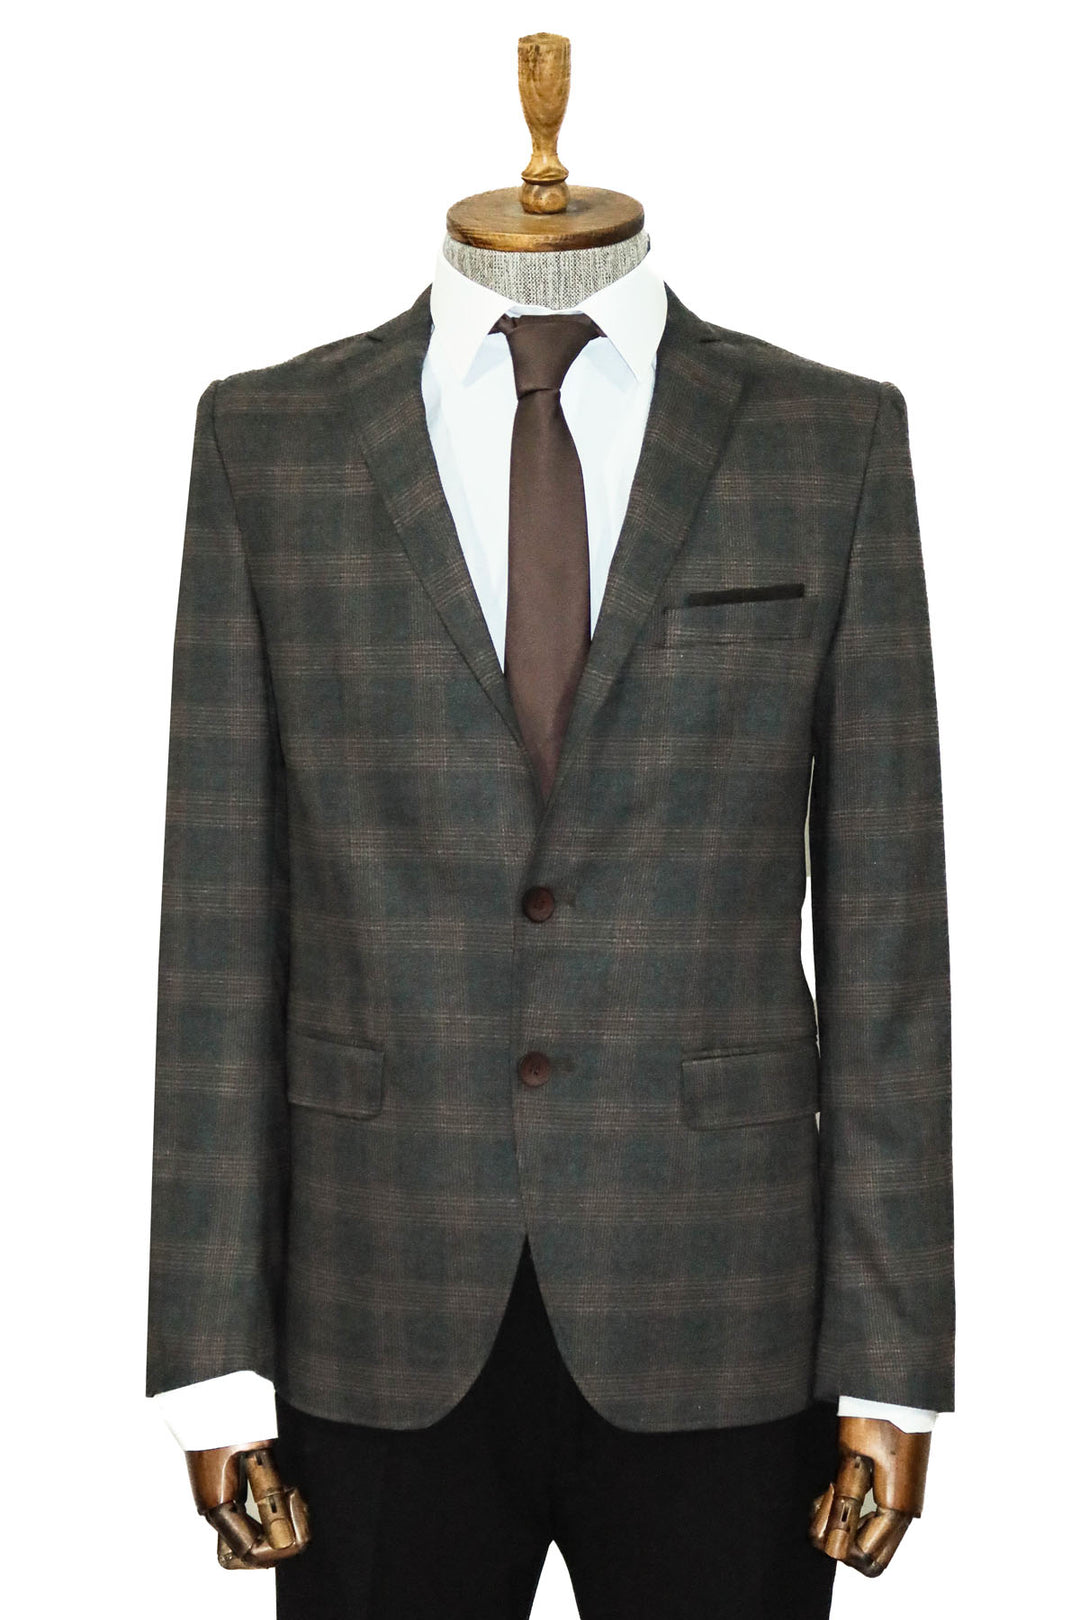 Plaid Smoked Jacket with Handkerchief - Wessi